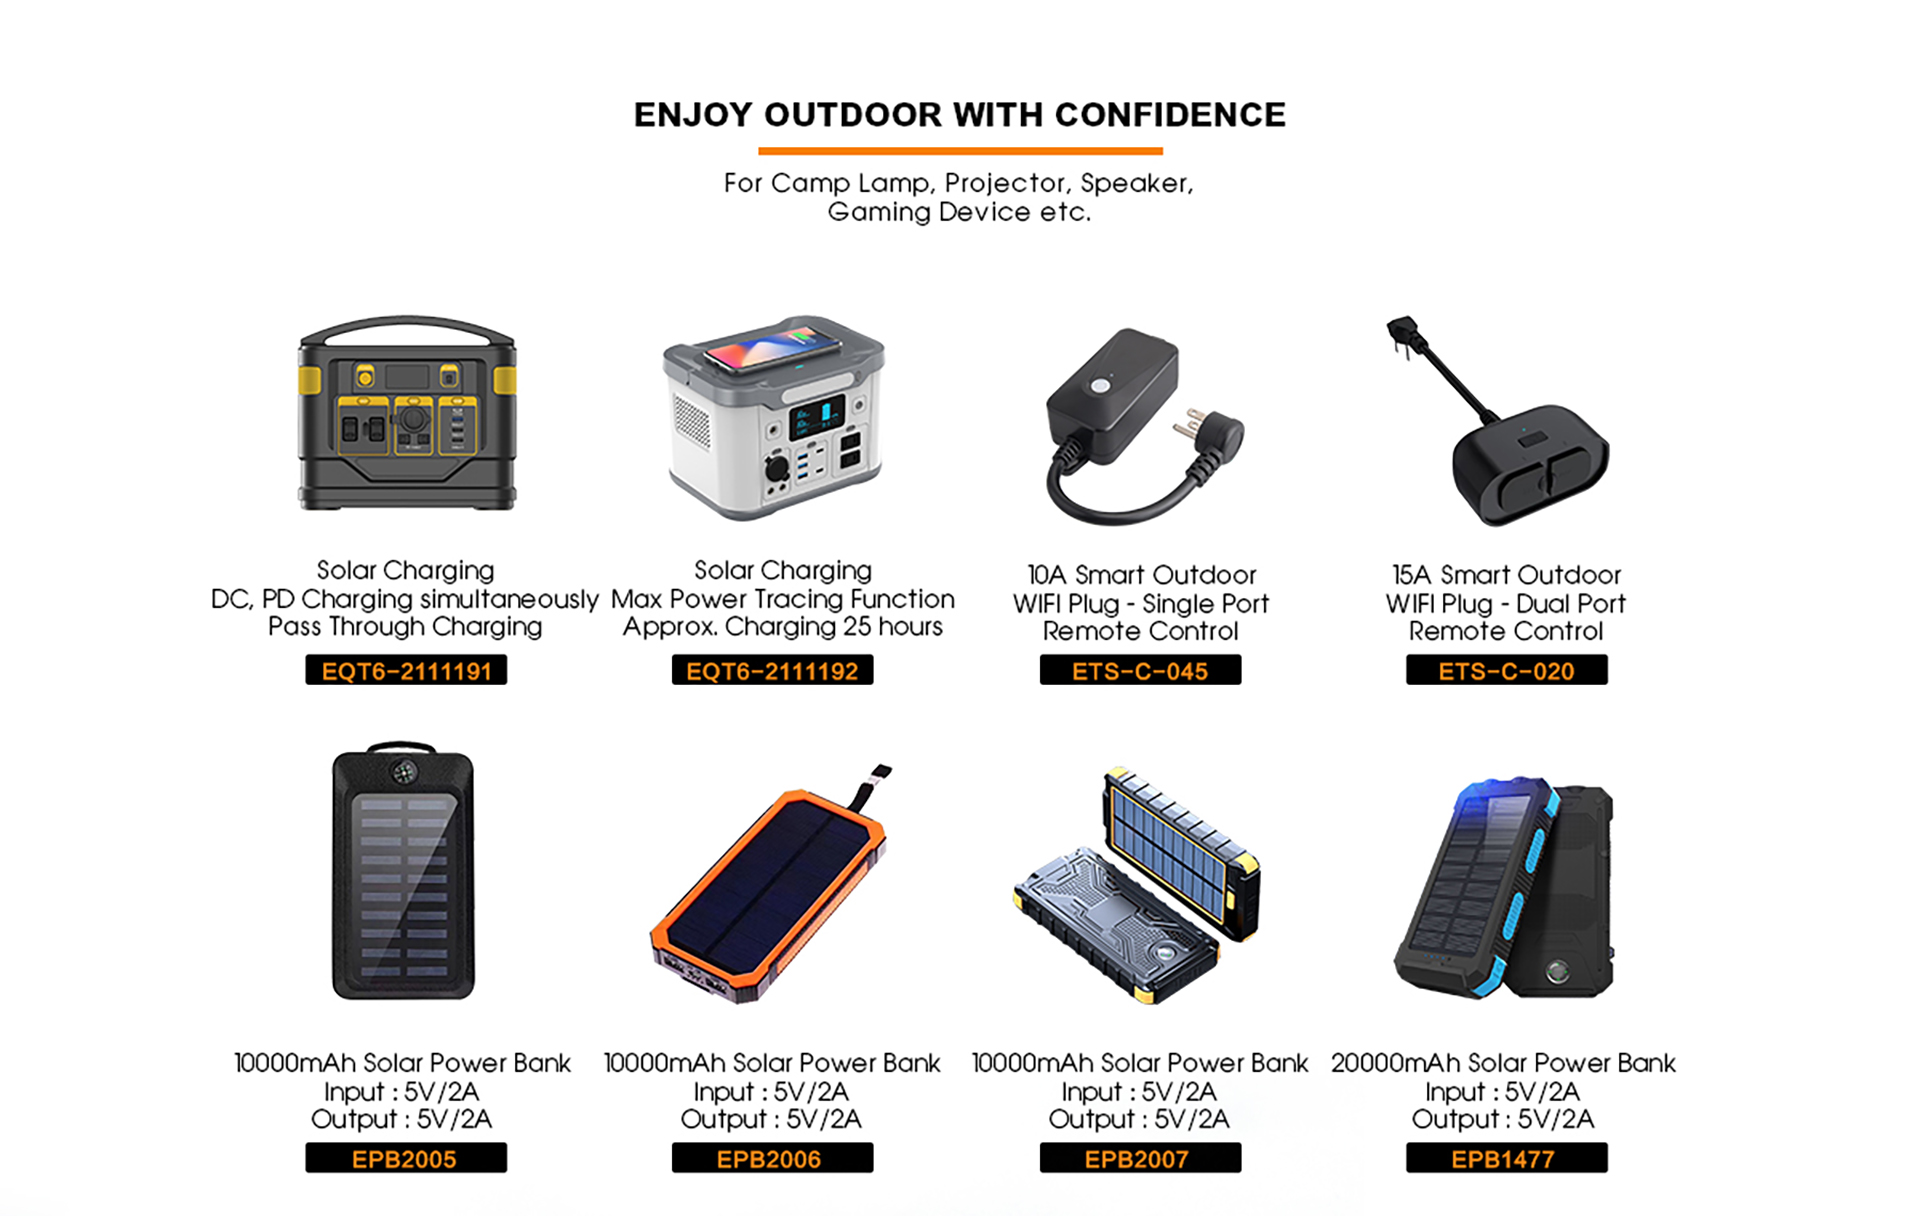 product catalog for solar charging,smart outdoor wifi plug,solar power bank